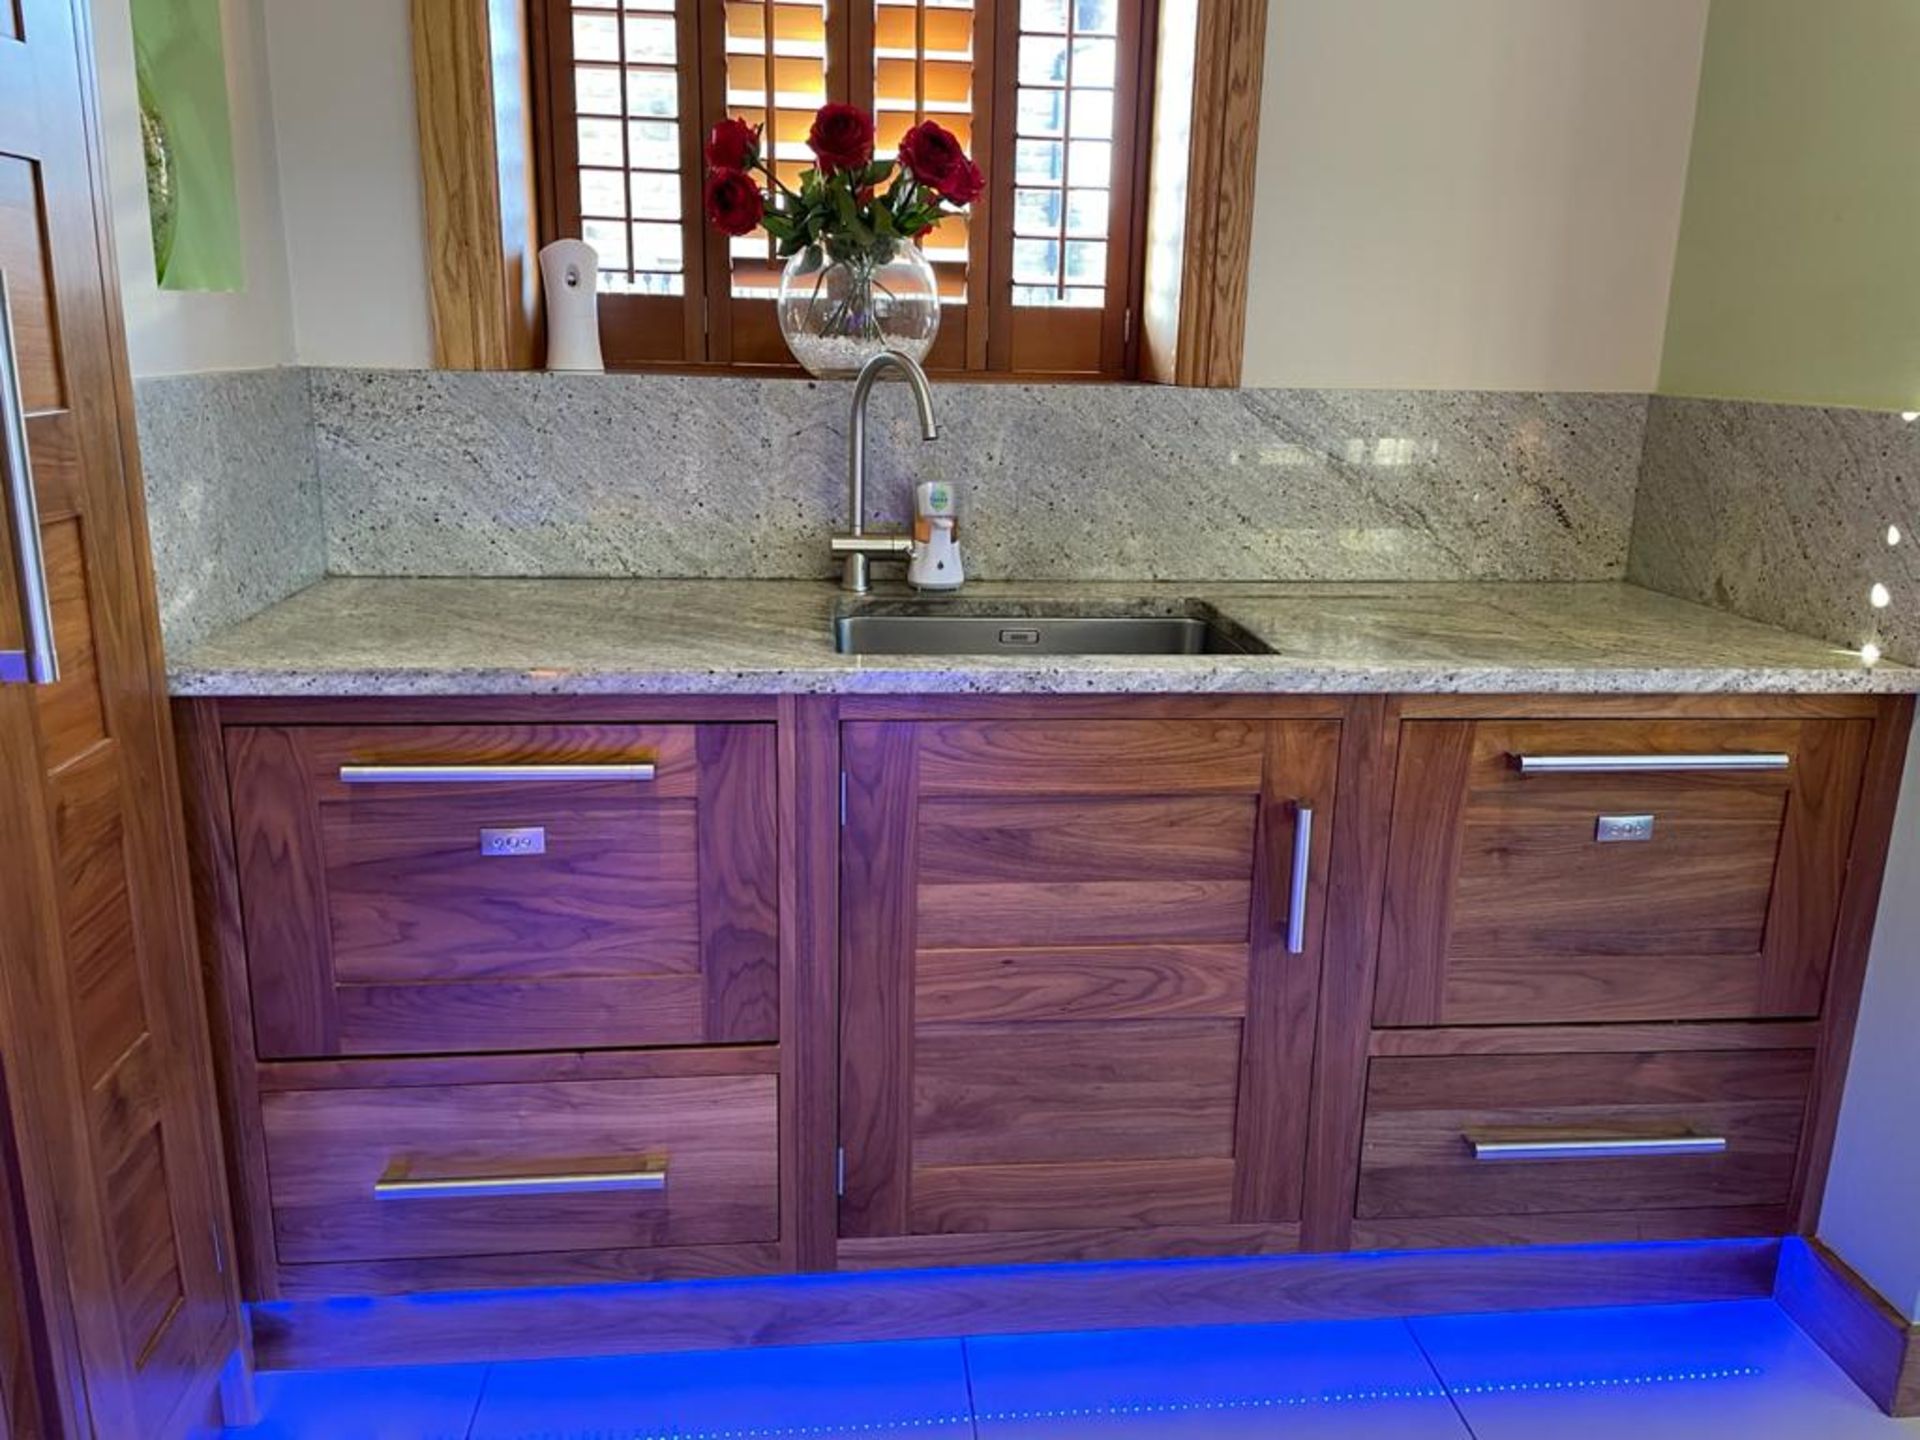 1 x Bespoke Curved Fitted Kitchen With Solid Wood Walnut Doors, Integrated Appliances, Granite Tops - Image 34 of 147